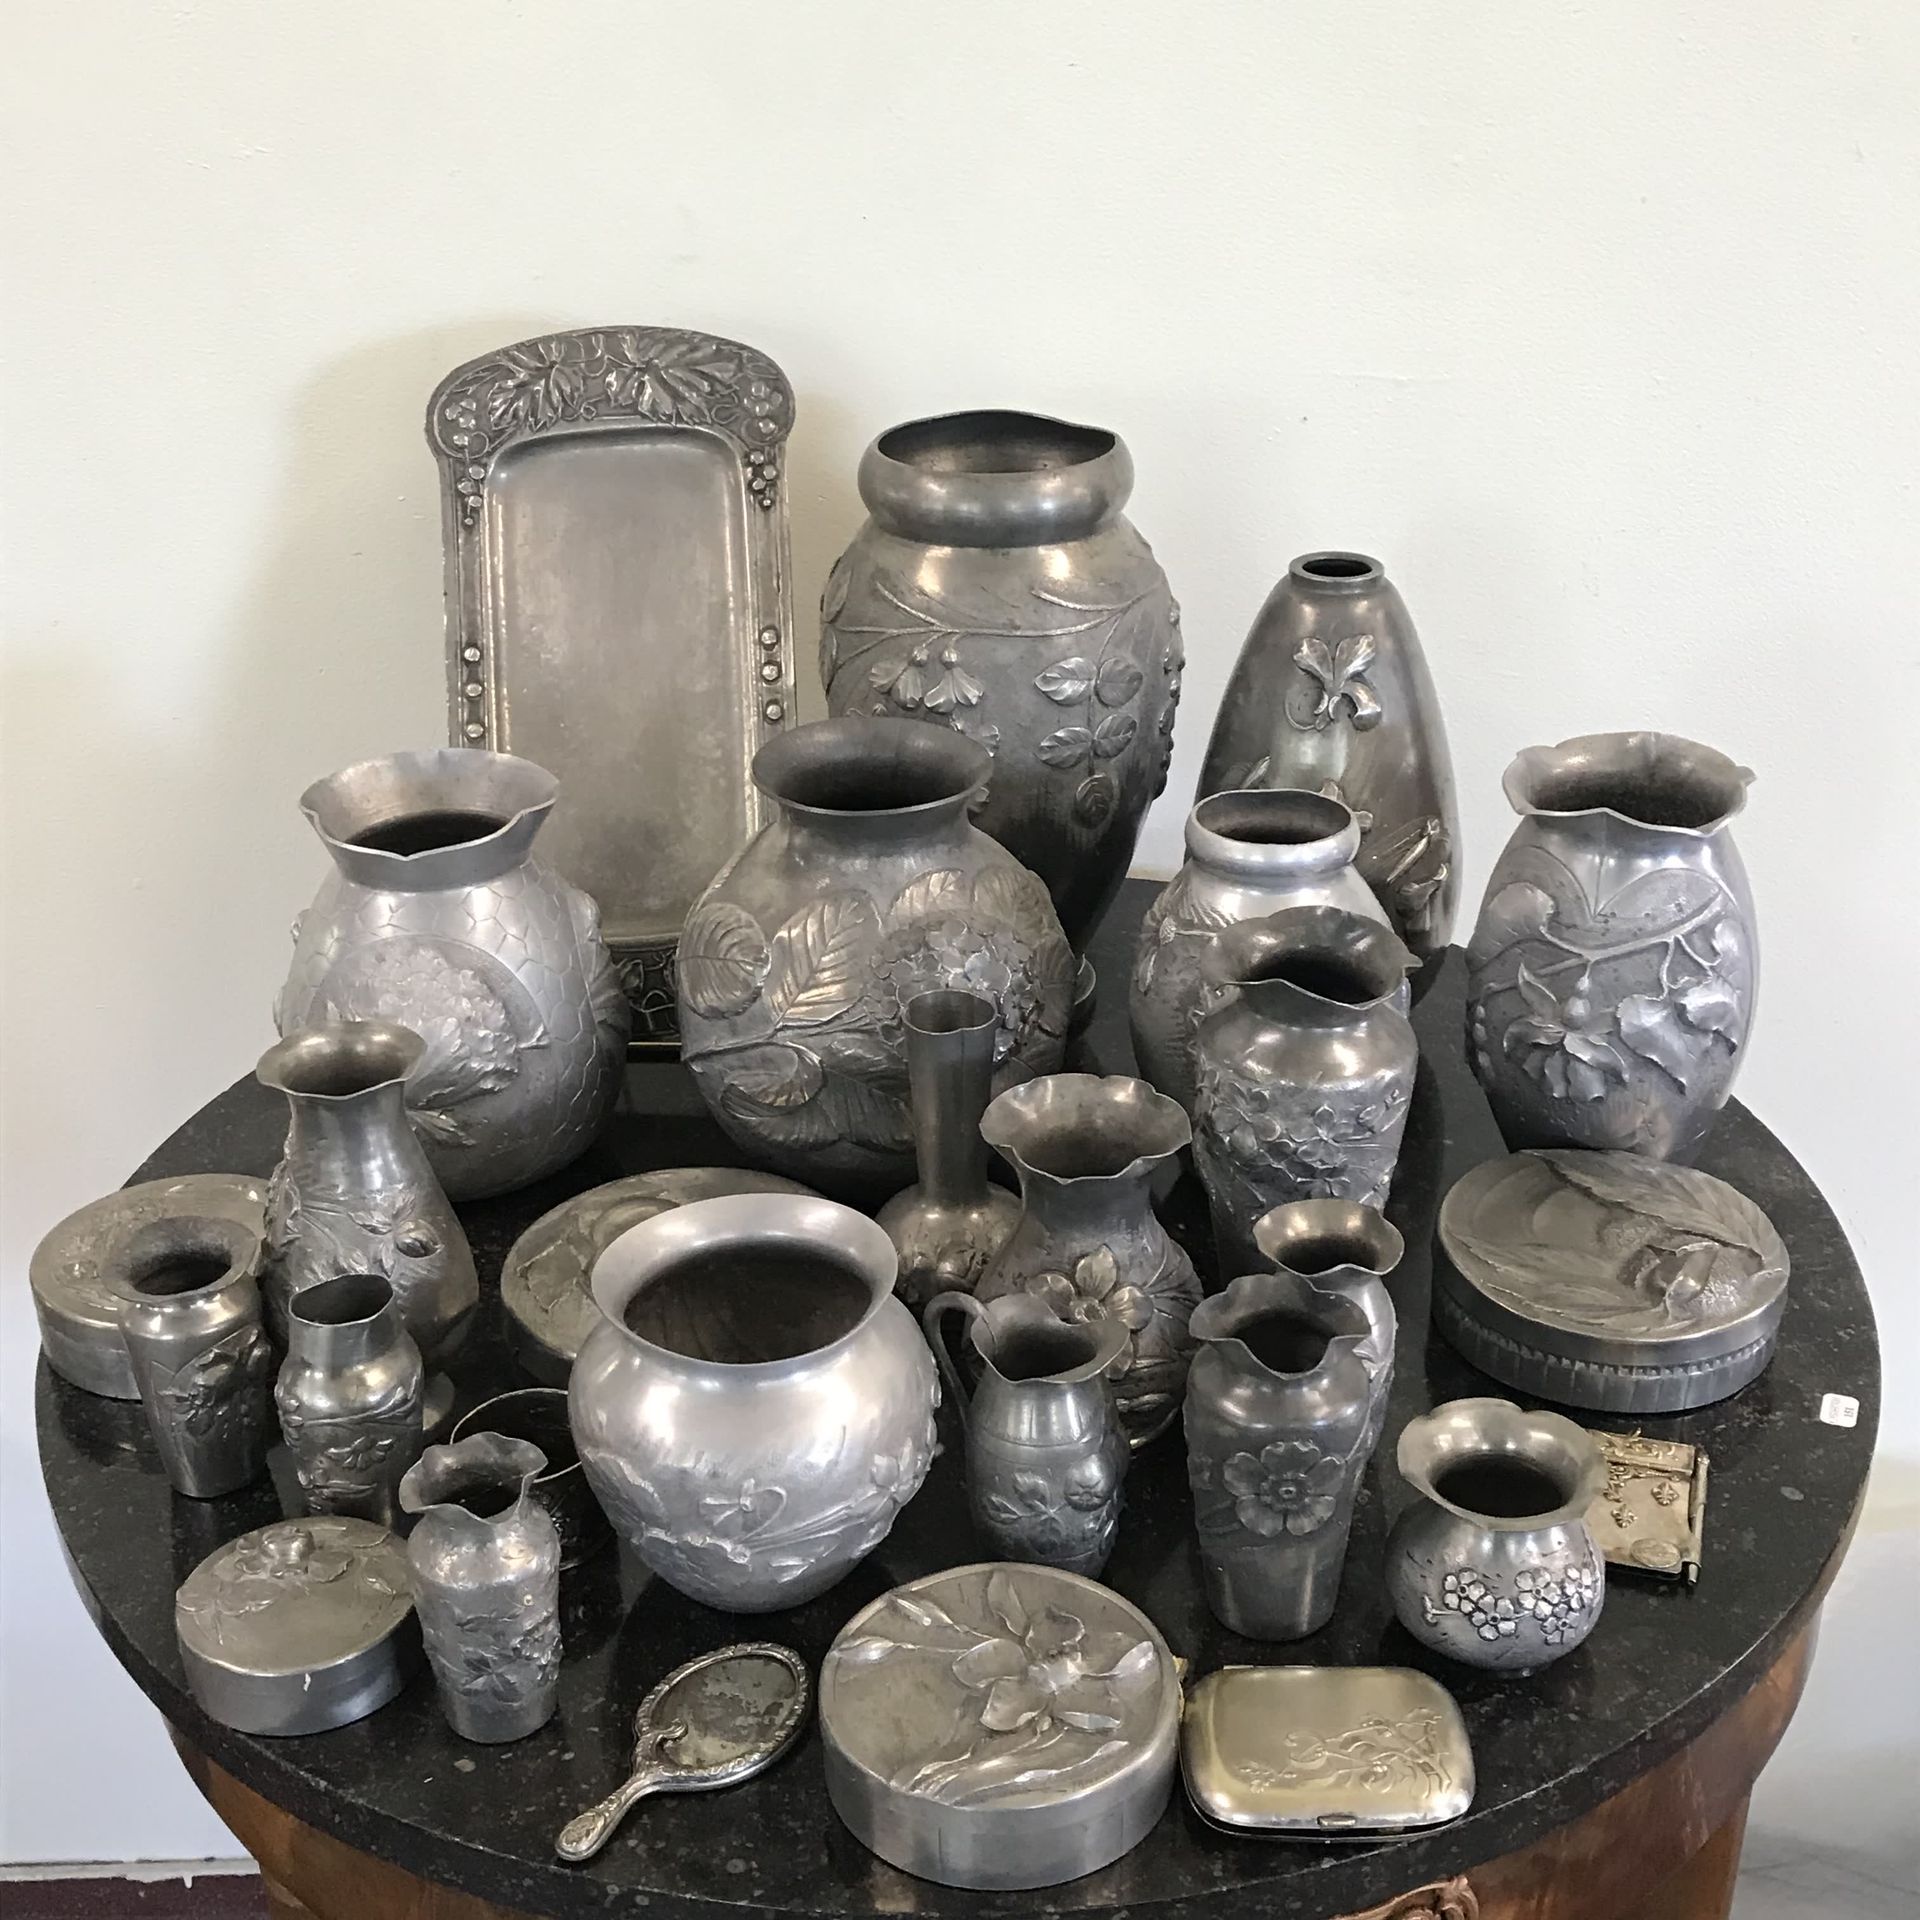 Null COLLECTION OF ART DECO PEWTER

Including vases, boxes, trays, saucers, and &hellip;